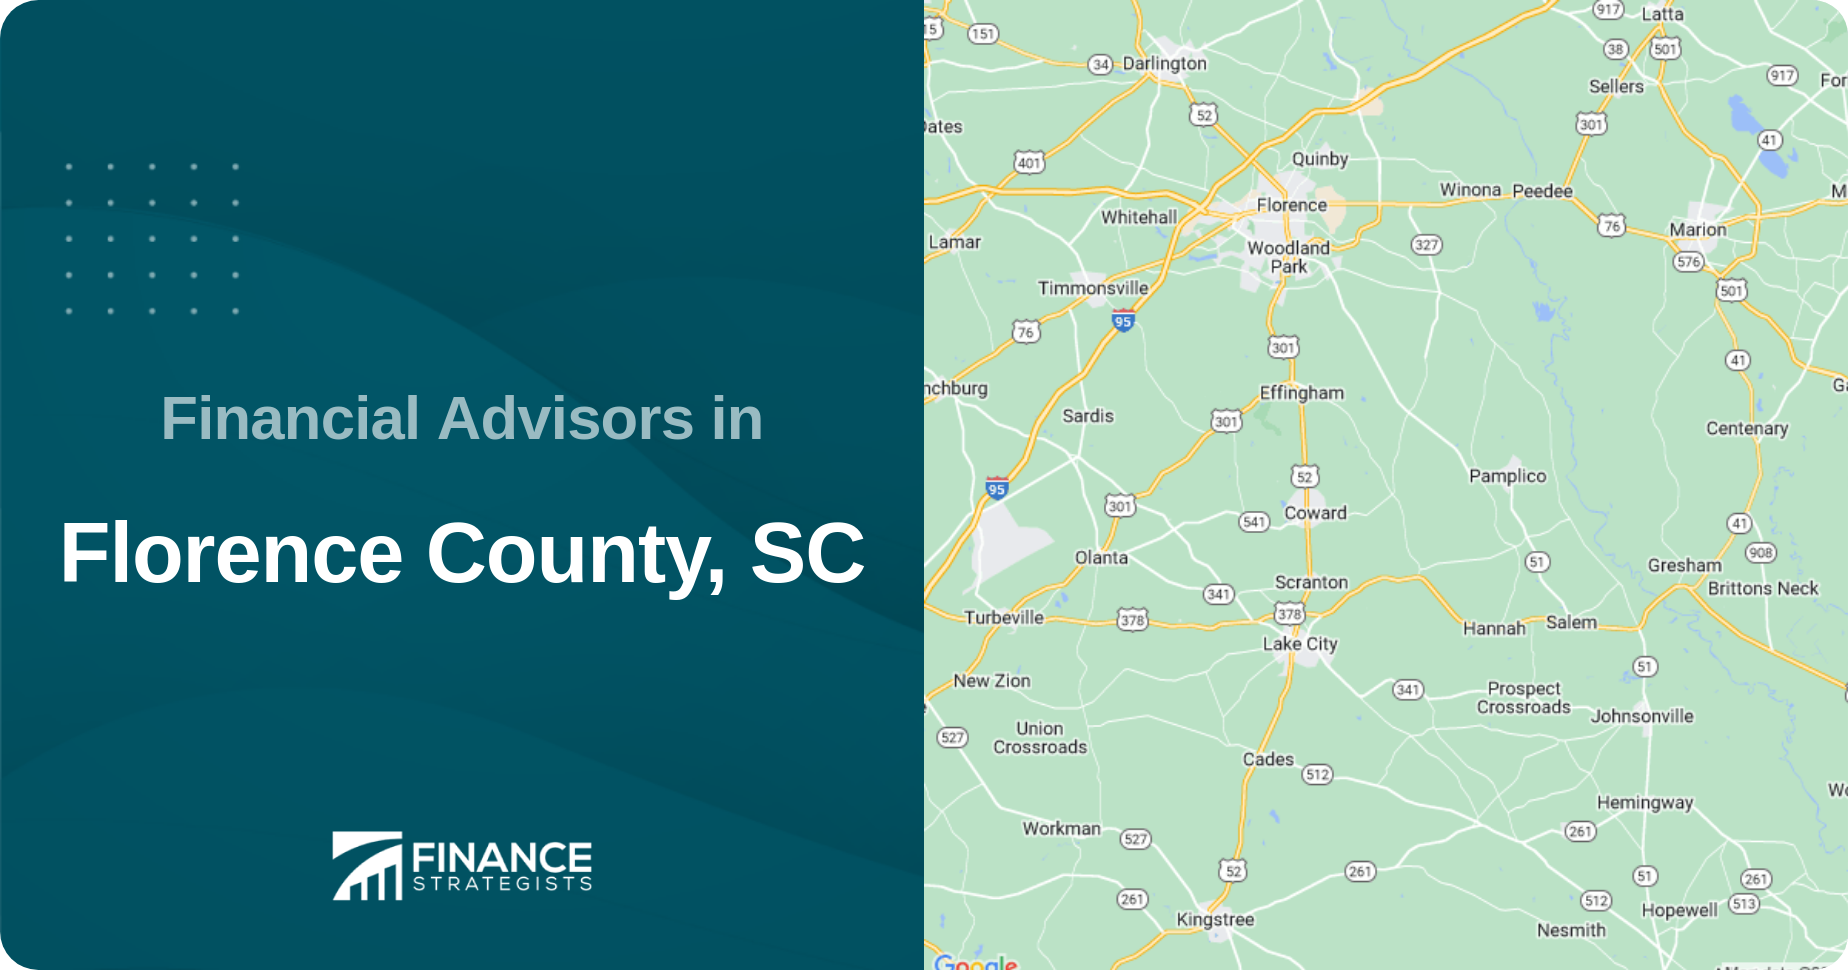 Financial Advisors in Florence County, SC